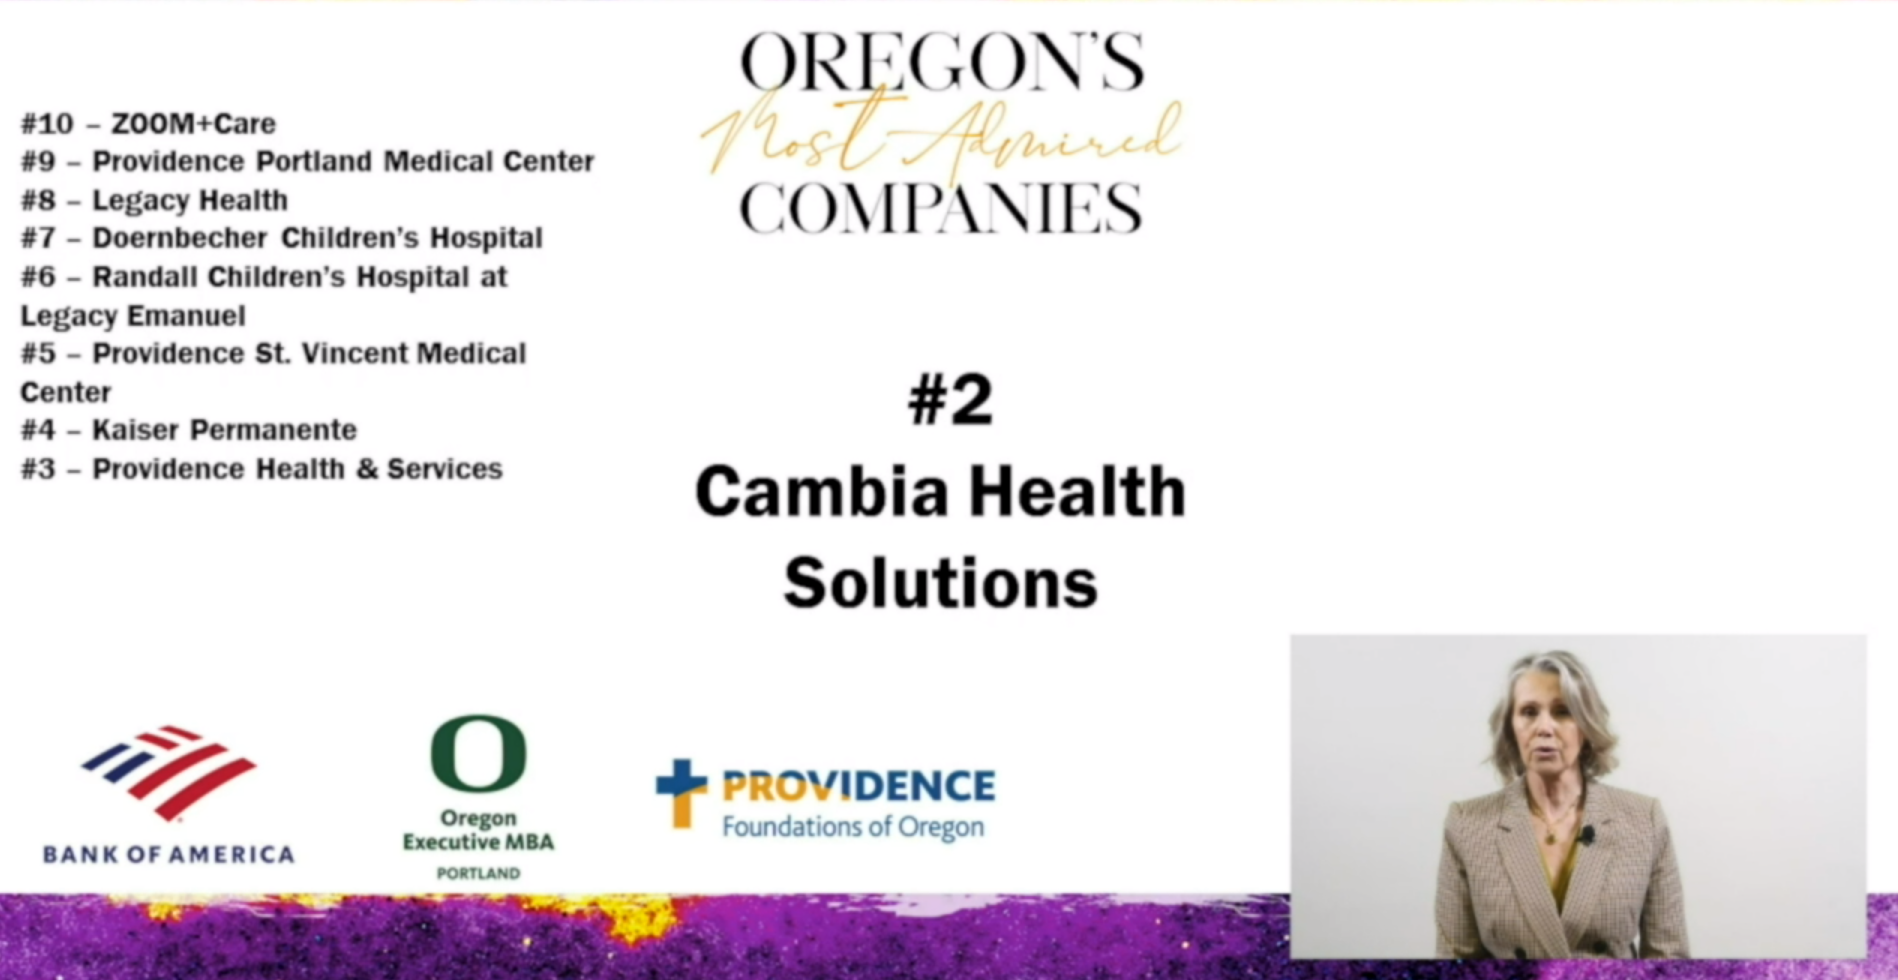 Cambia Health Solutions Named Second Most Admired Health Care Company